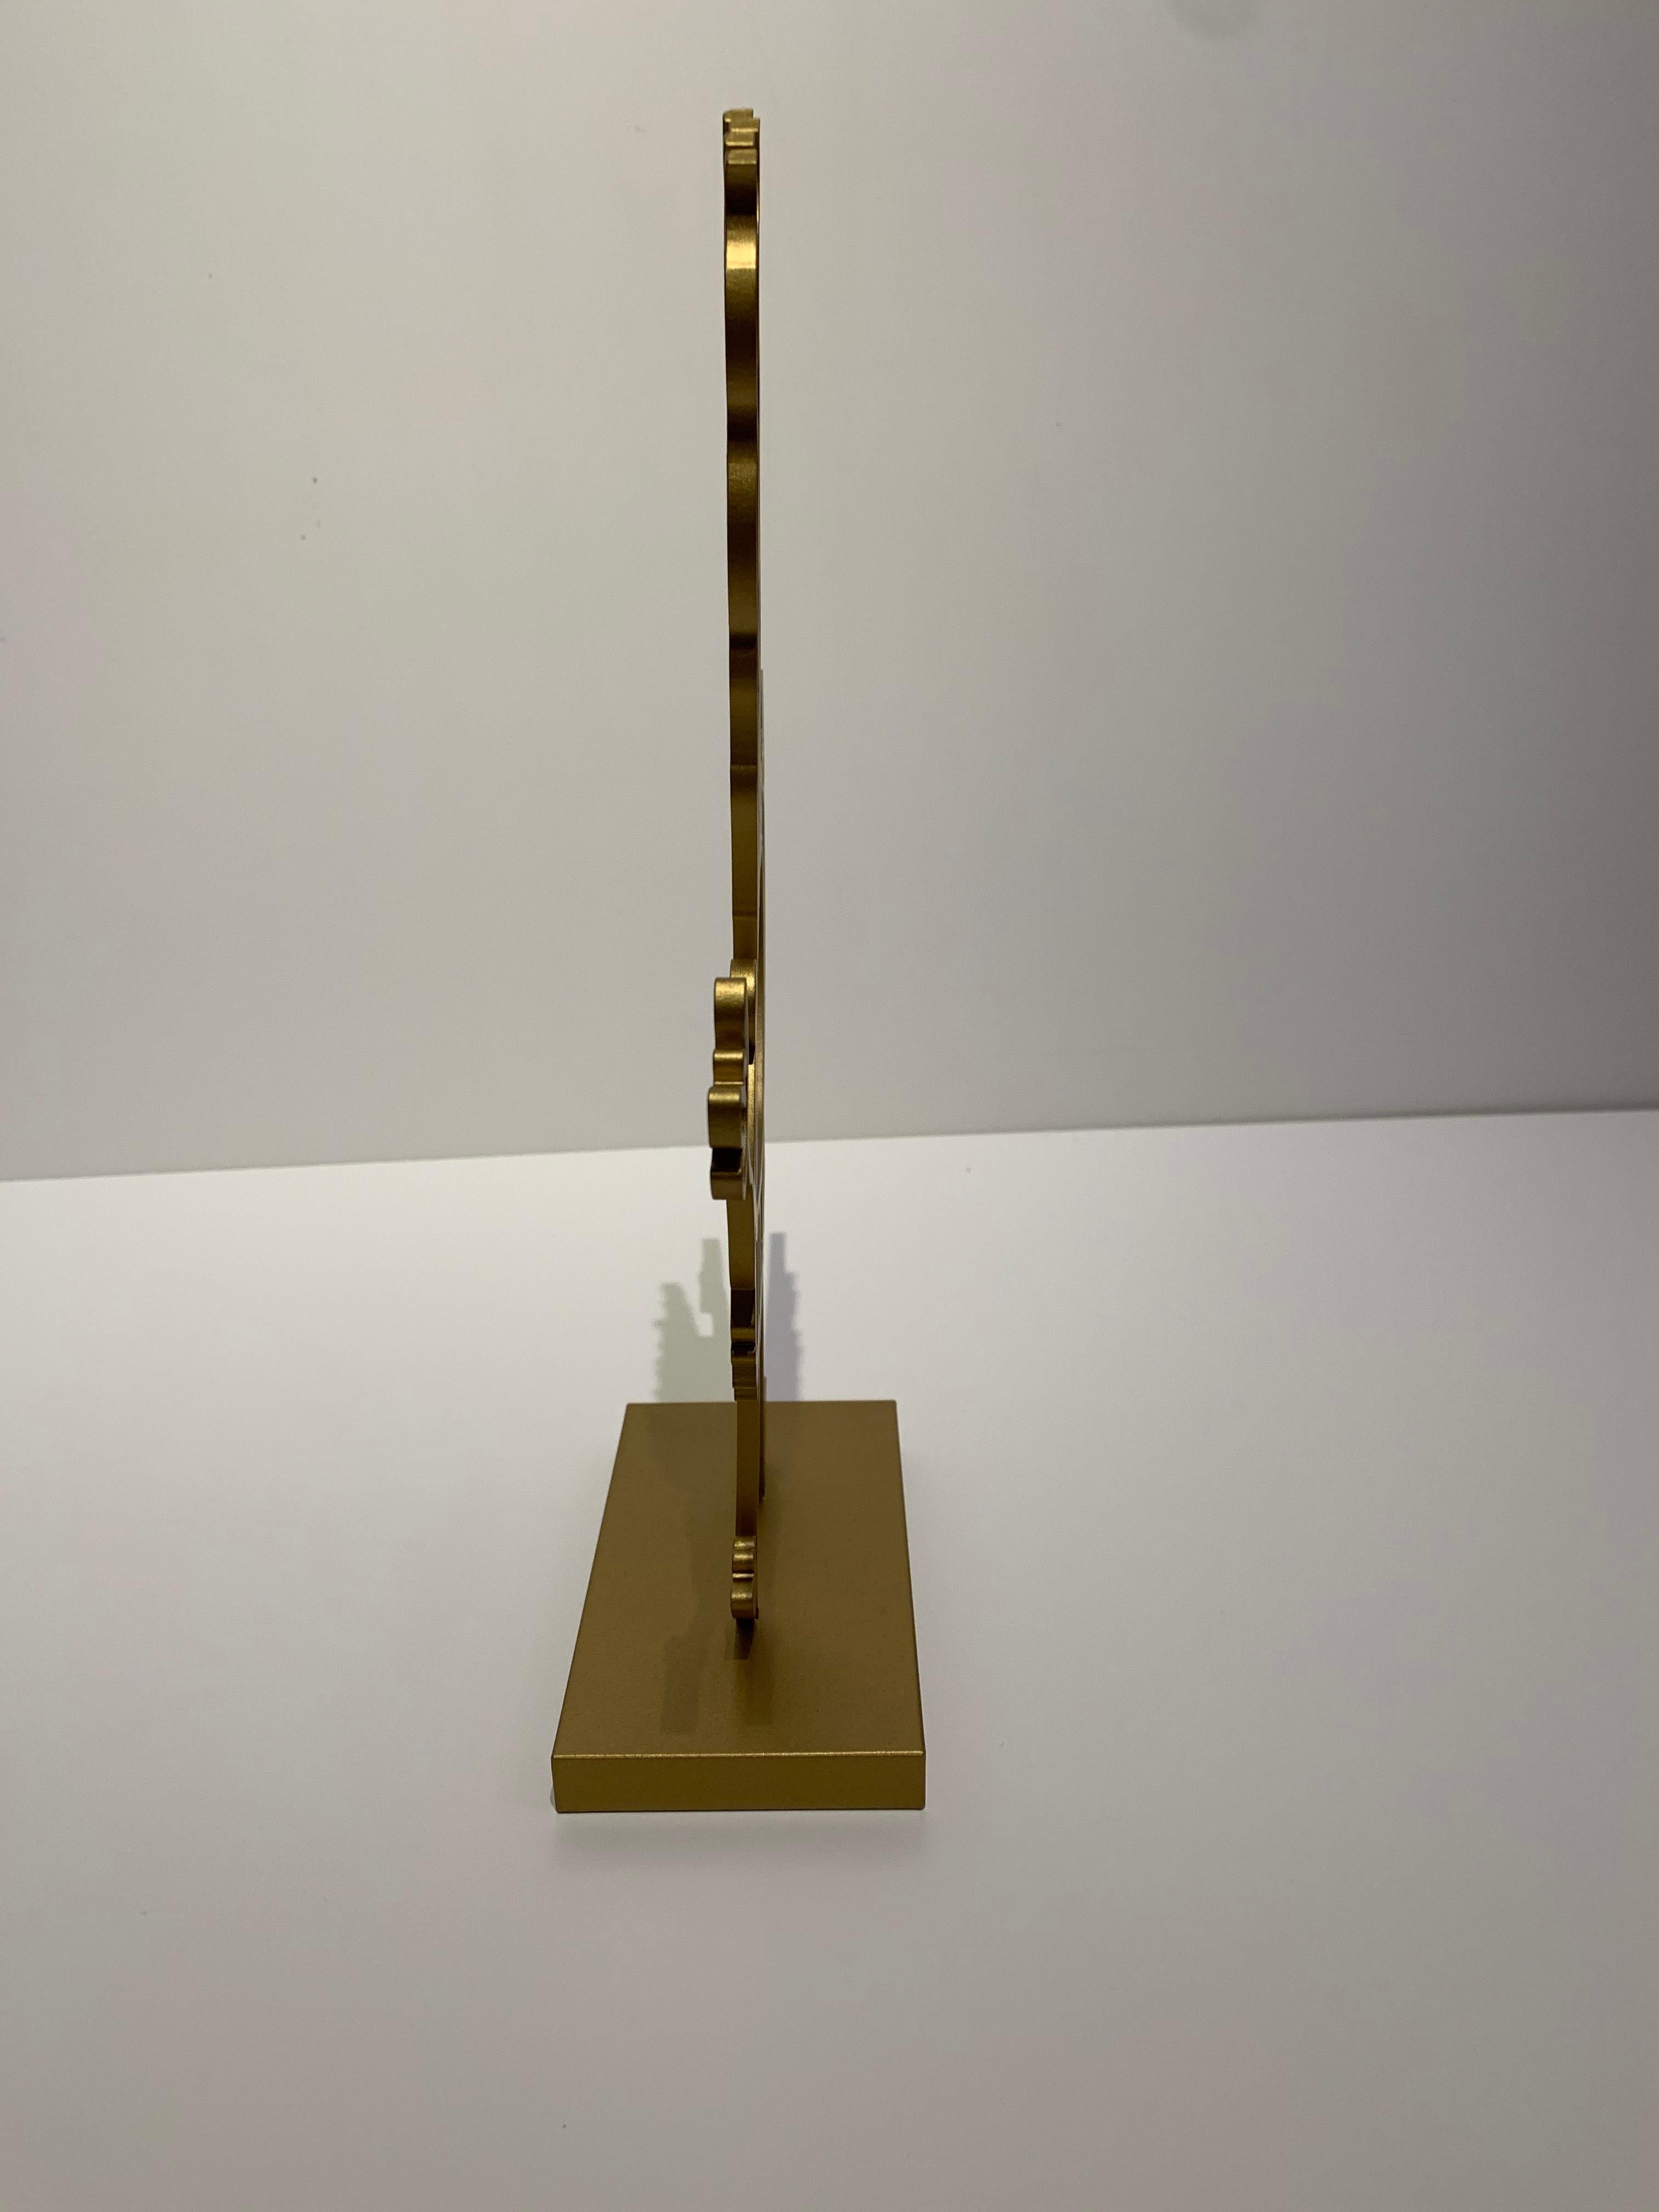 Xavi Carbonell, Untitled 2019, Gold Painted Metal Sculpture 2/25 2